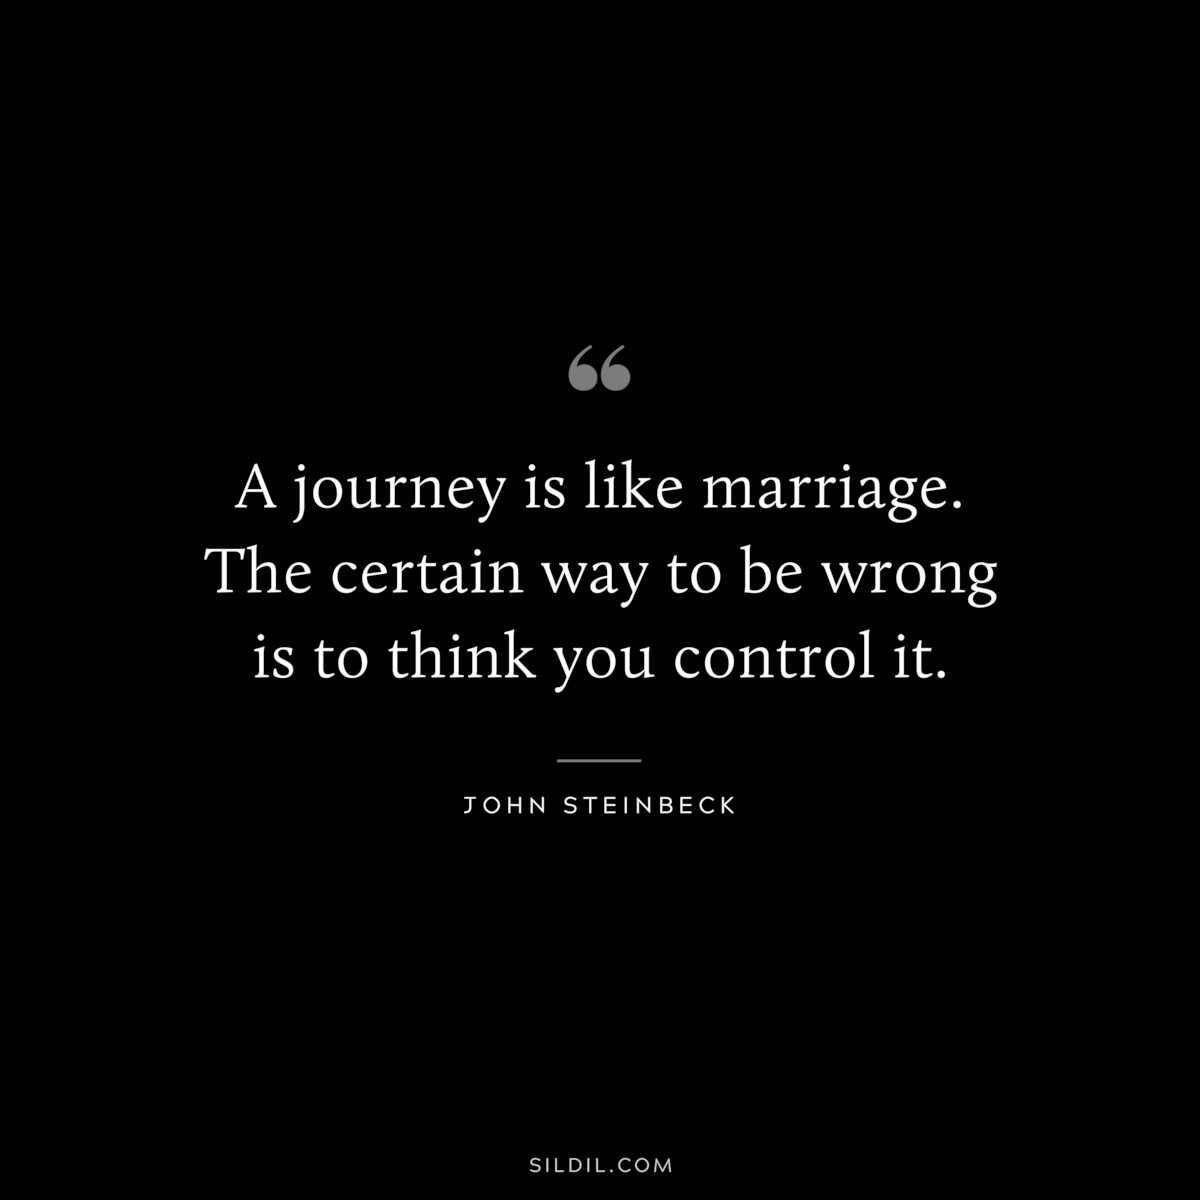 A journey is like marriage. The certain way to be wrong is to think you control it.― John Steinbeck